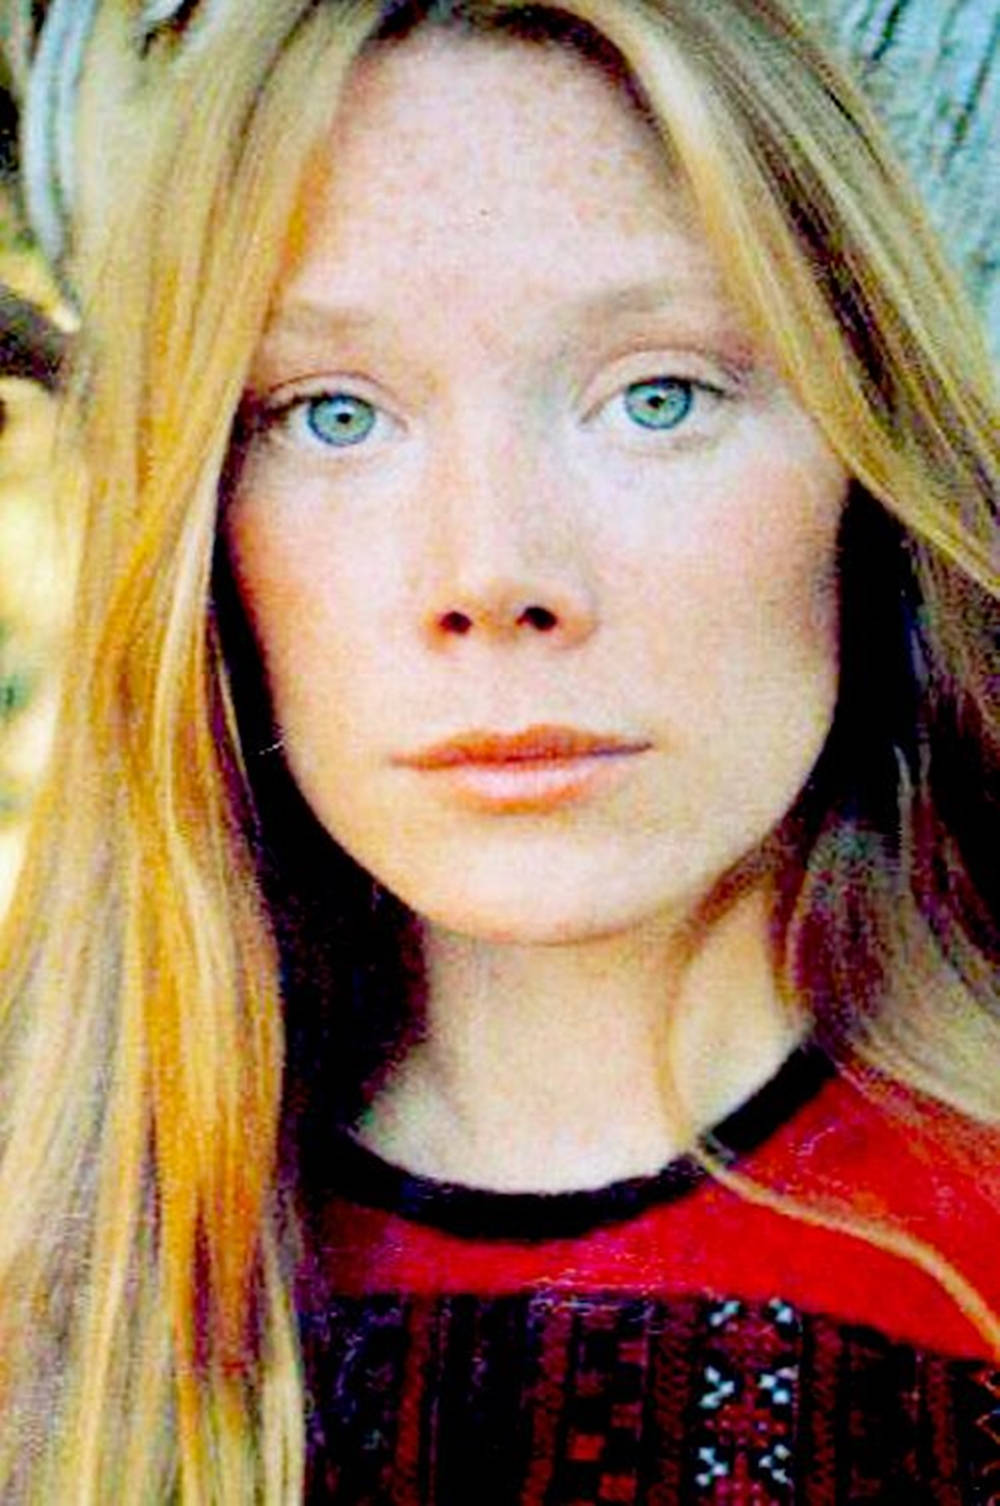 (most Likely Referring To Sissy Spacek As A Potential Image Or Wallpaper For A Computer Or Mobile Device That Highlights Her As A Movie Star In The Film Prime Cut.) Wallpaper